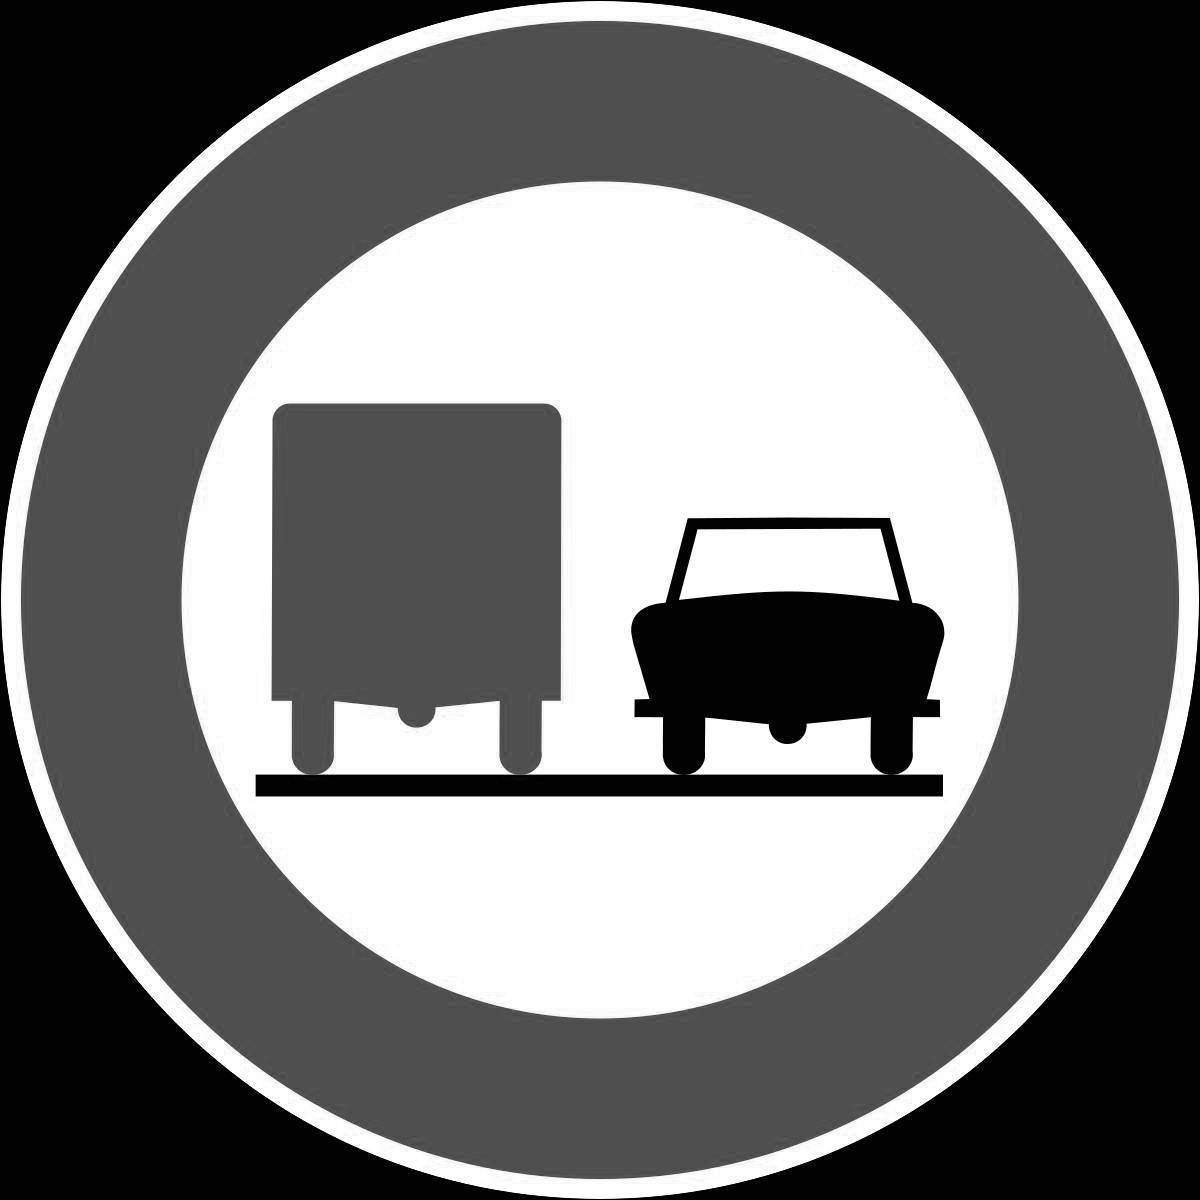 Exciting no overtaking traffic sign coloring page